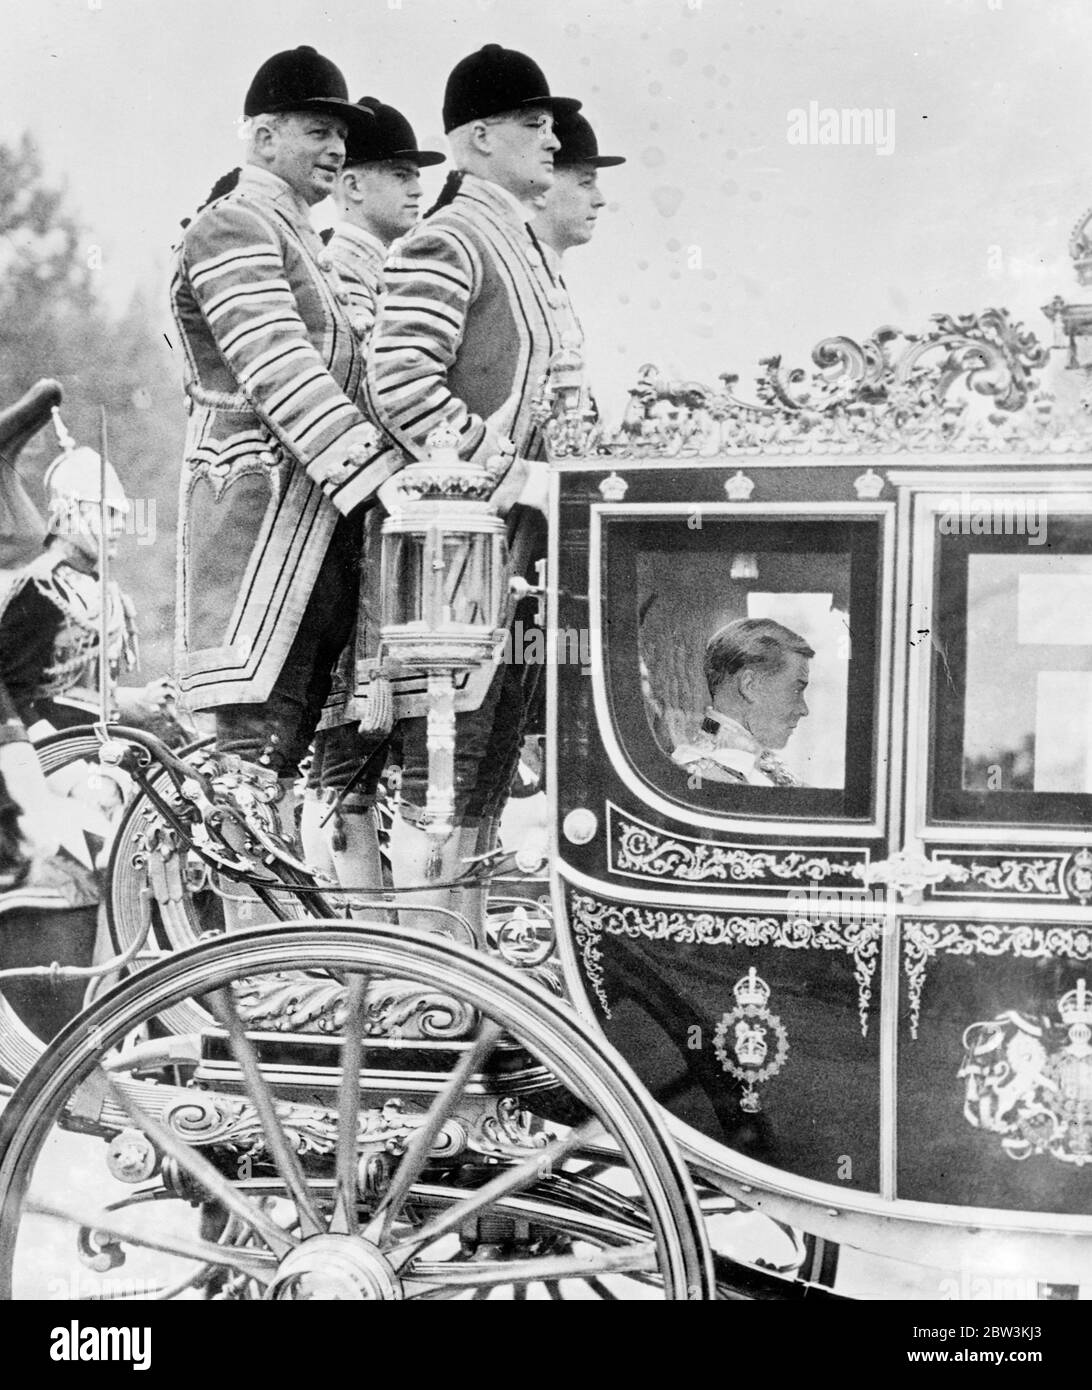 King leaves St James ' s Palace after levee . After having held the second levee , of his reign at St James ' s Palace , King Edward returned in the gold State coach to Buckingham Palace . Photo shows , King Edward leaving St James ' sPalace in the state coach . 26 May 1936 Stock Photo